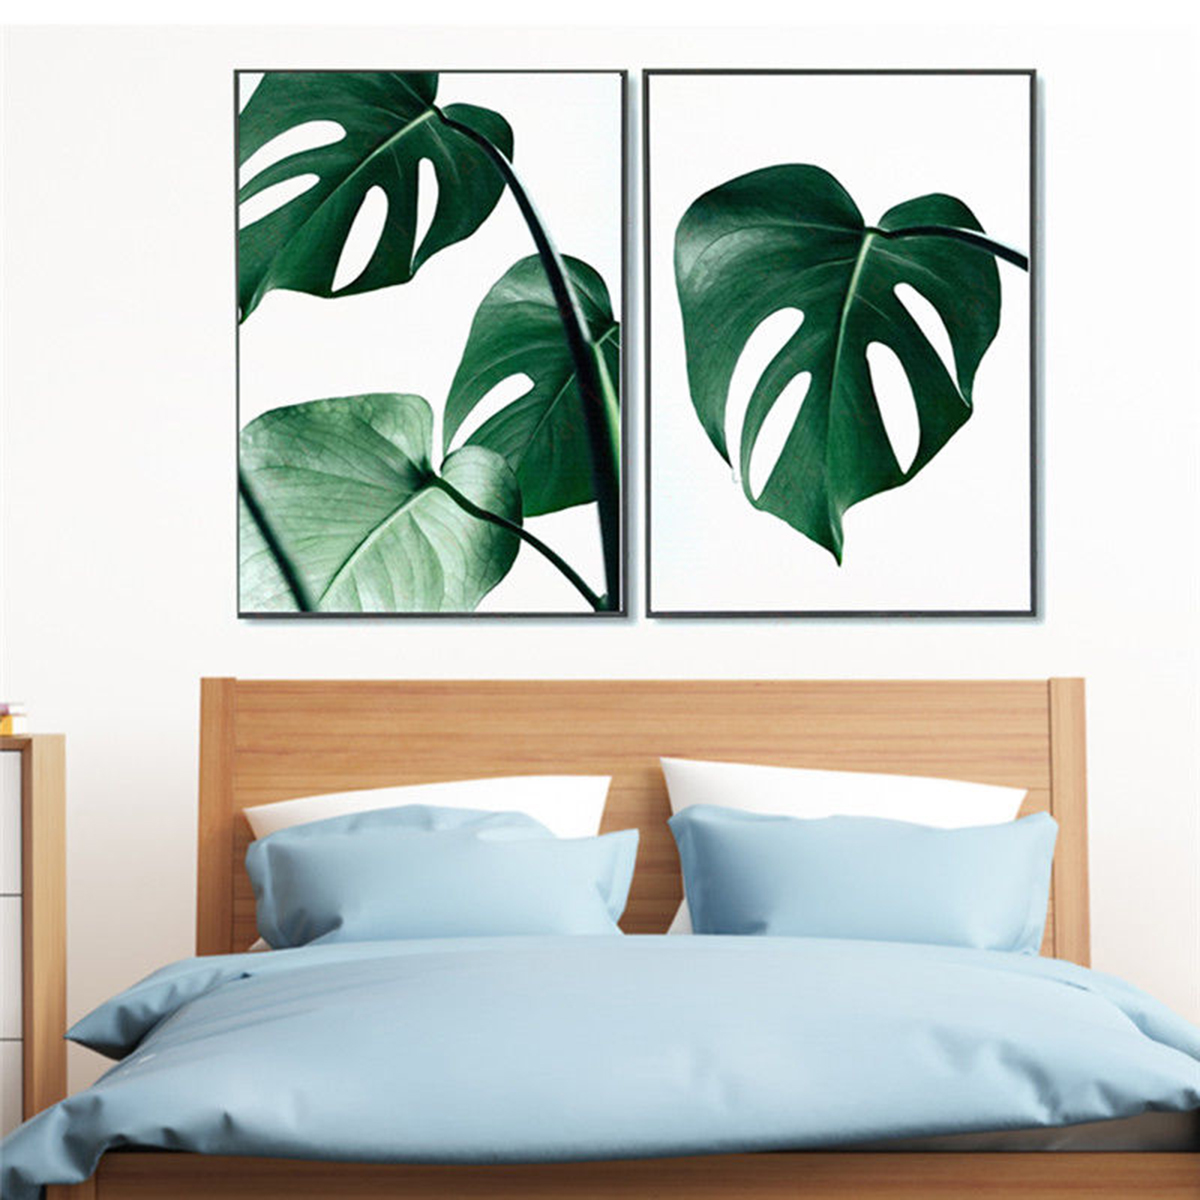 1-Piece-Canvas-Print-Painting-Nordic-Green-Plant-Leaf-Canvas-Art-Poster-Print-Wall-Picture-Home-Deco-1743641-5